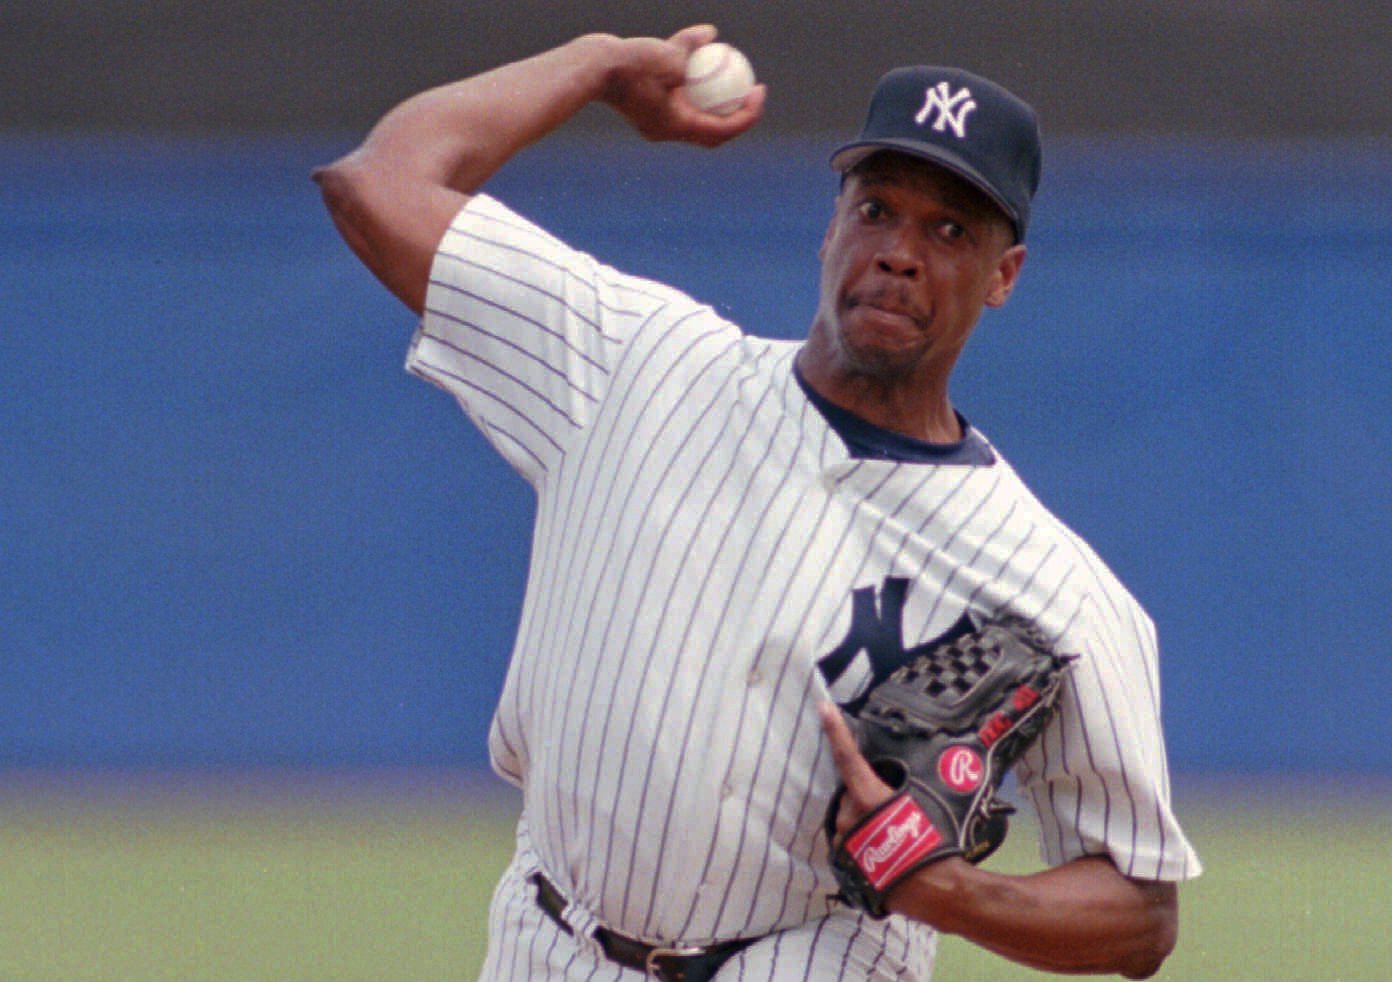 Yankees, Mets great Dwight Gooden gets probation after cocaine bust 